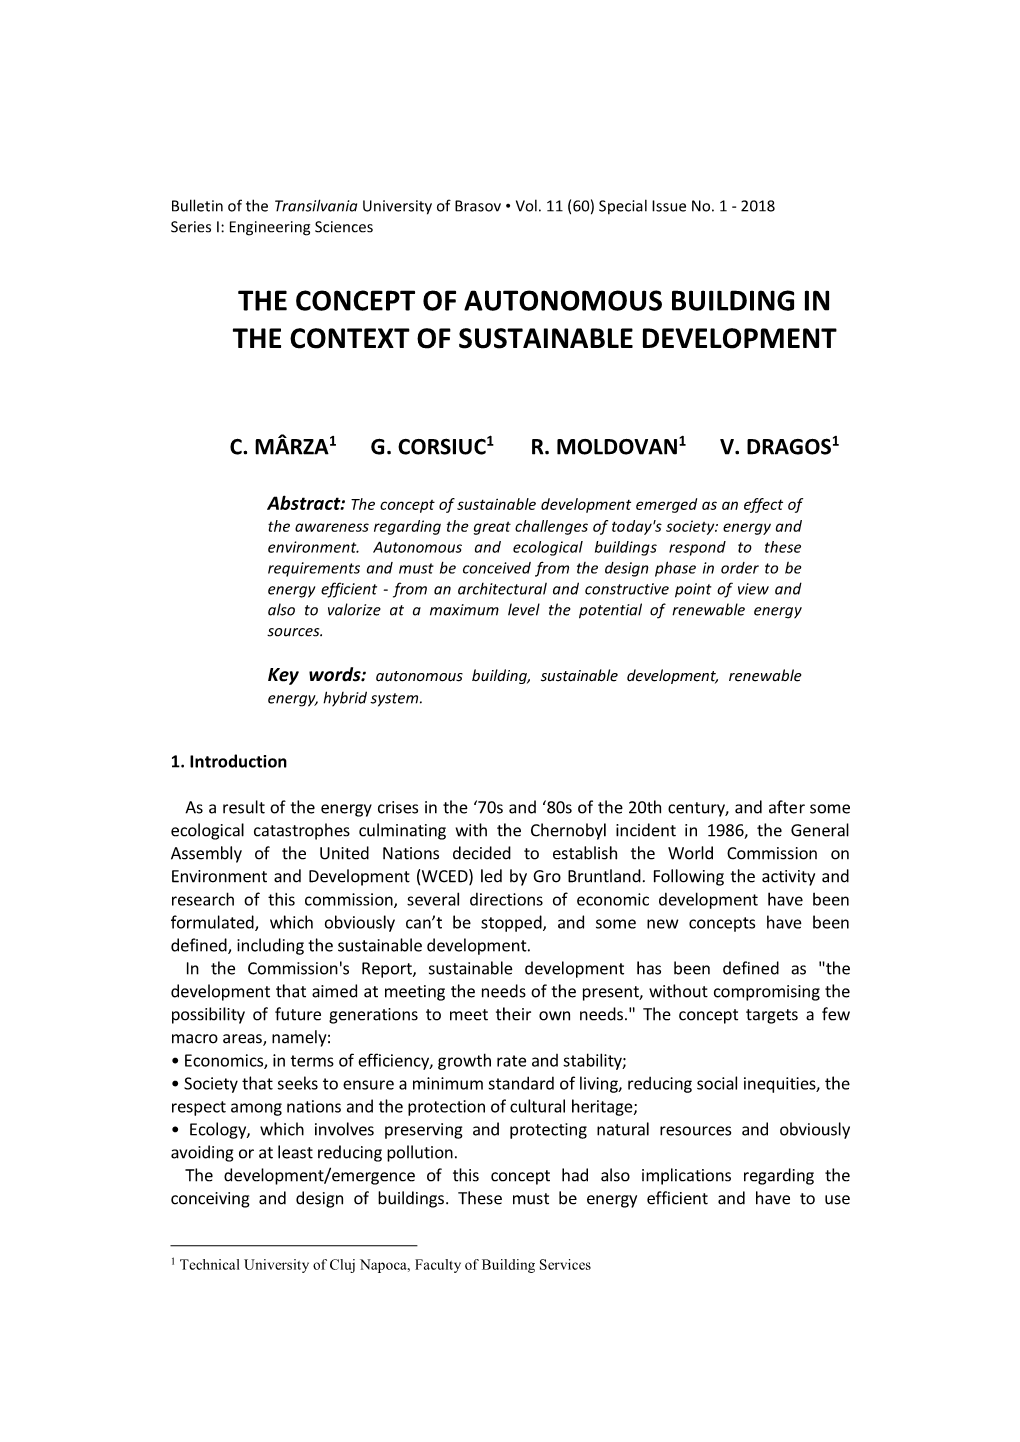 The Concept of Autonomous Building in the Context of Sustainable Development